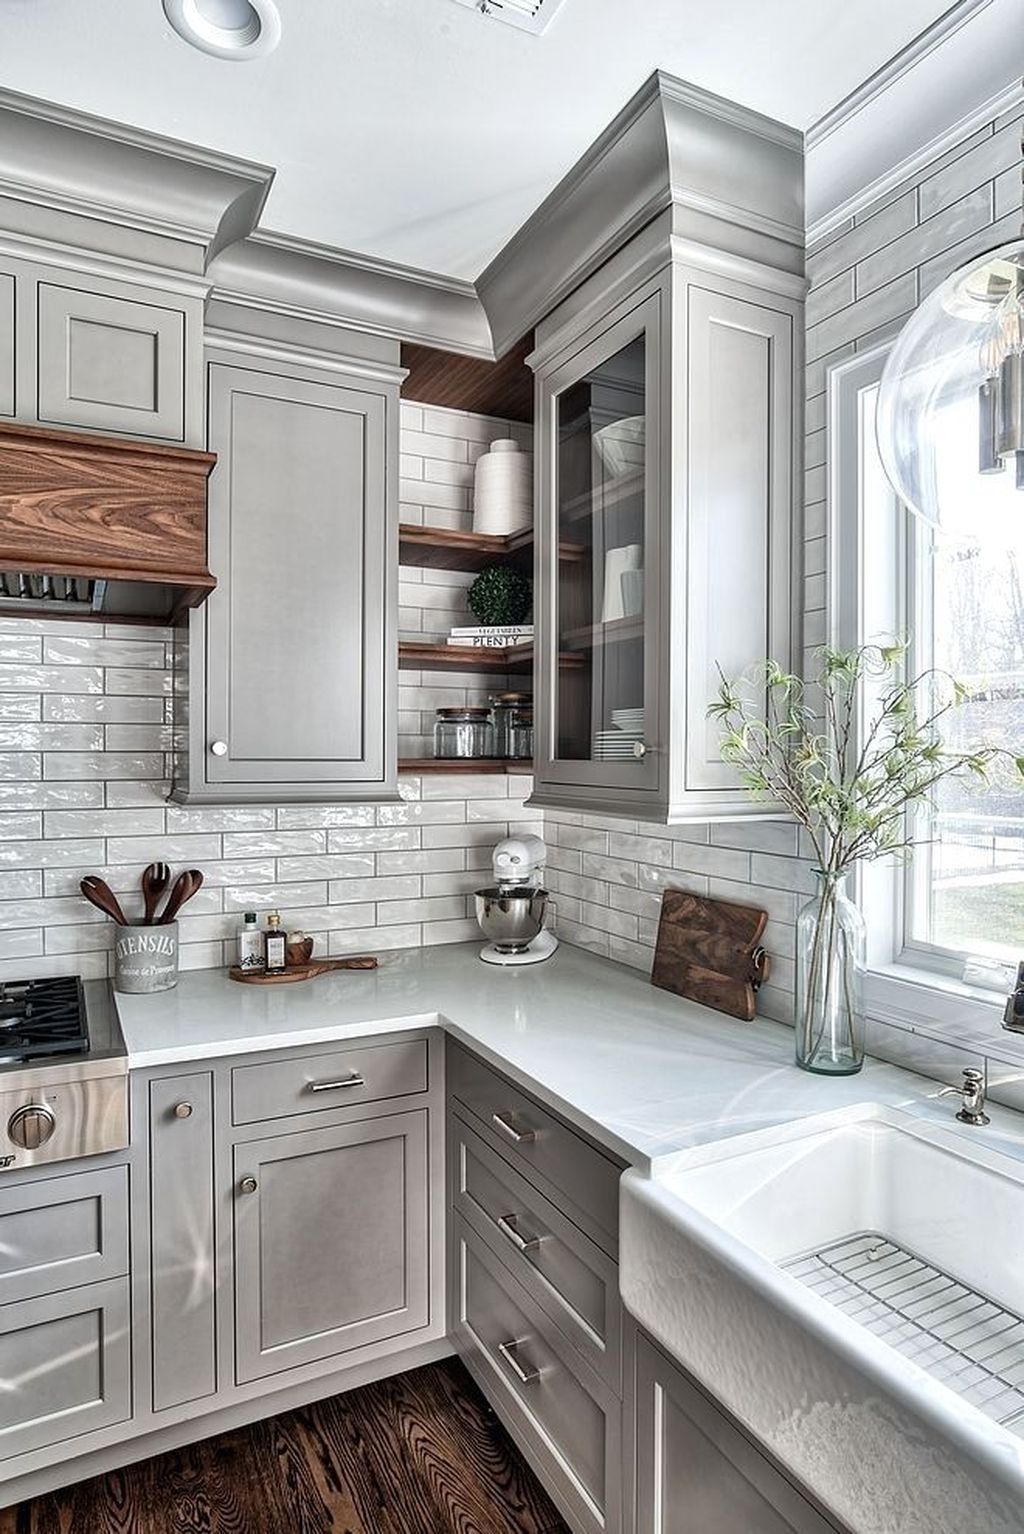 Kitchen renovation: how to achieve
elegance and style